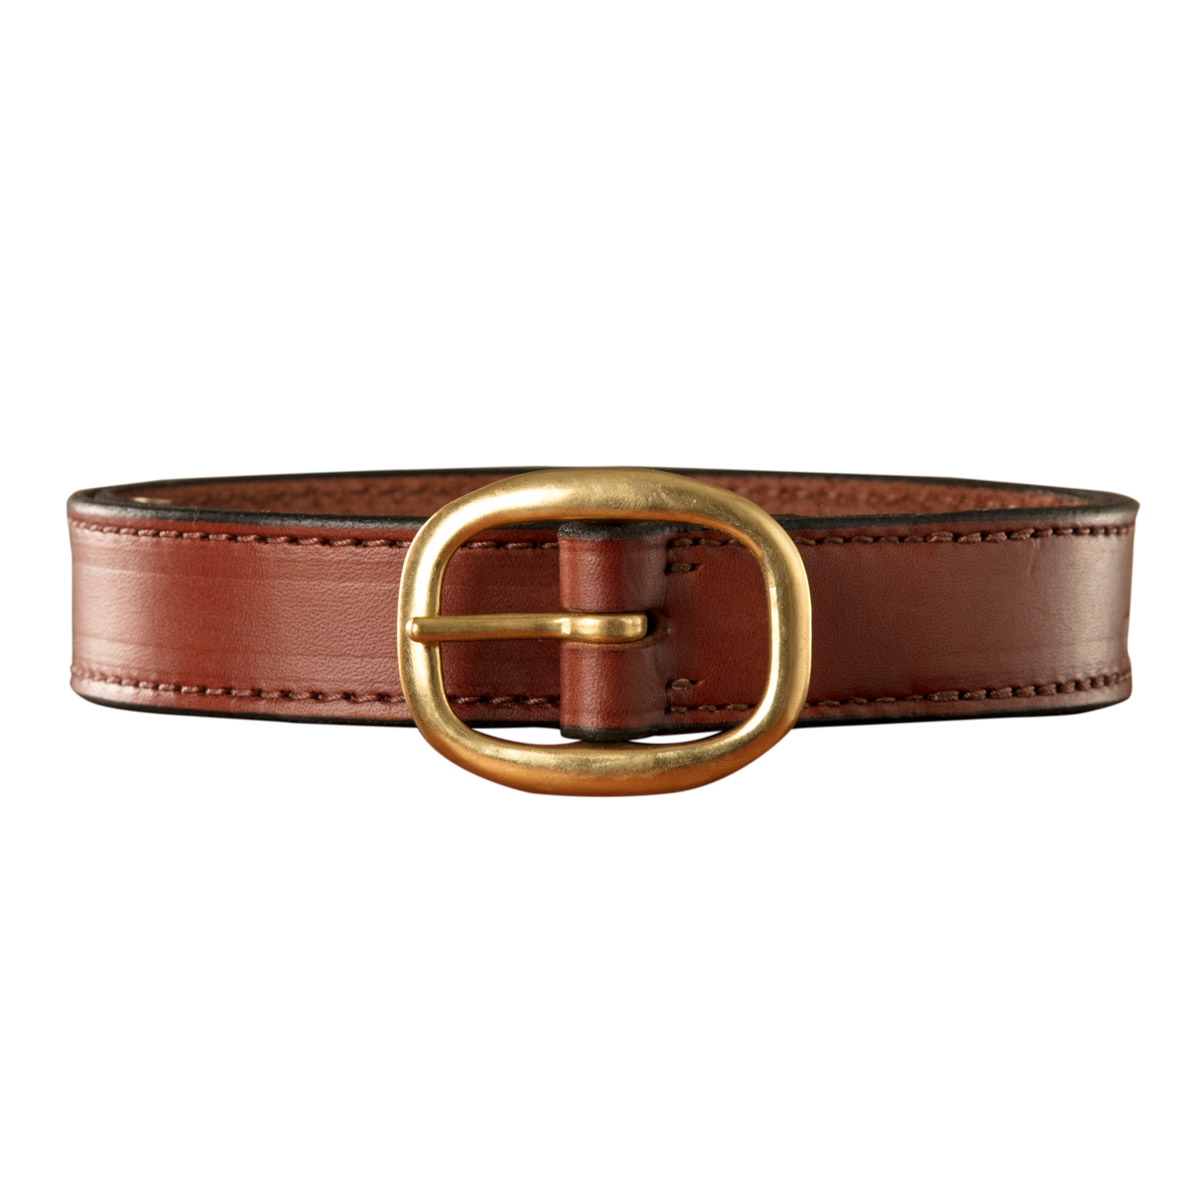 Dress Belt, 1 1/2" (38mm) Brown Edge-Sewn Leather, with Brass Swage Buckle 1